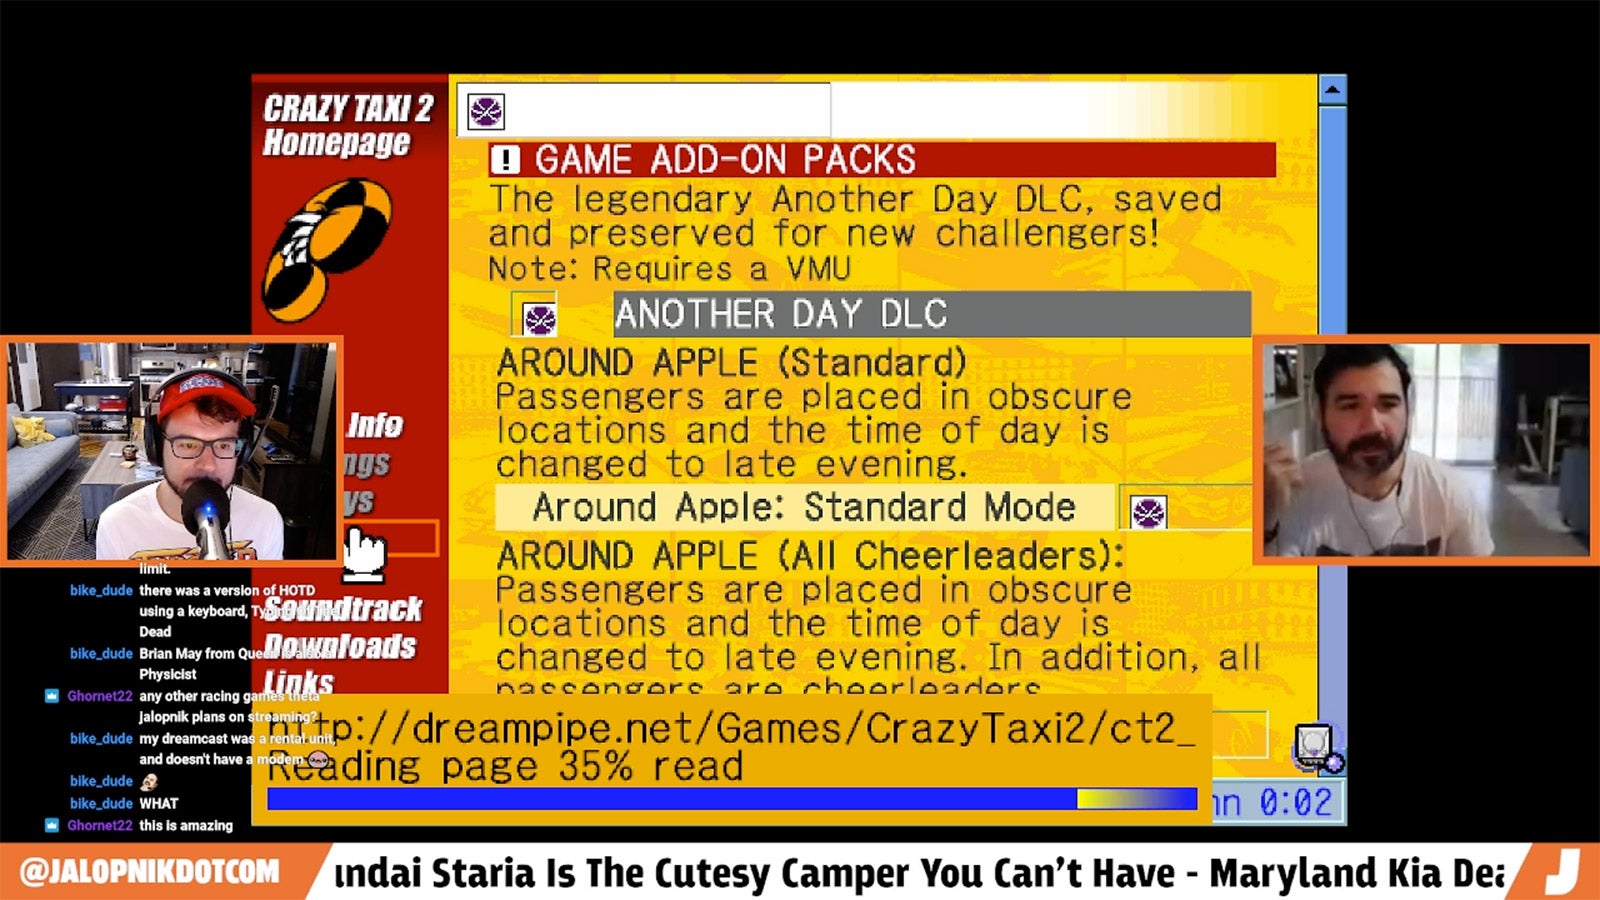 I’m Delighted to Inform You That the Crazy Taxi 2 Website Still Exists, Thanks to Dedicated Fans